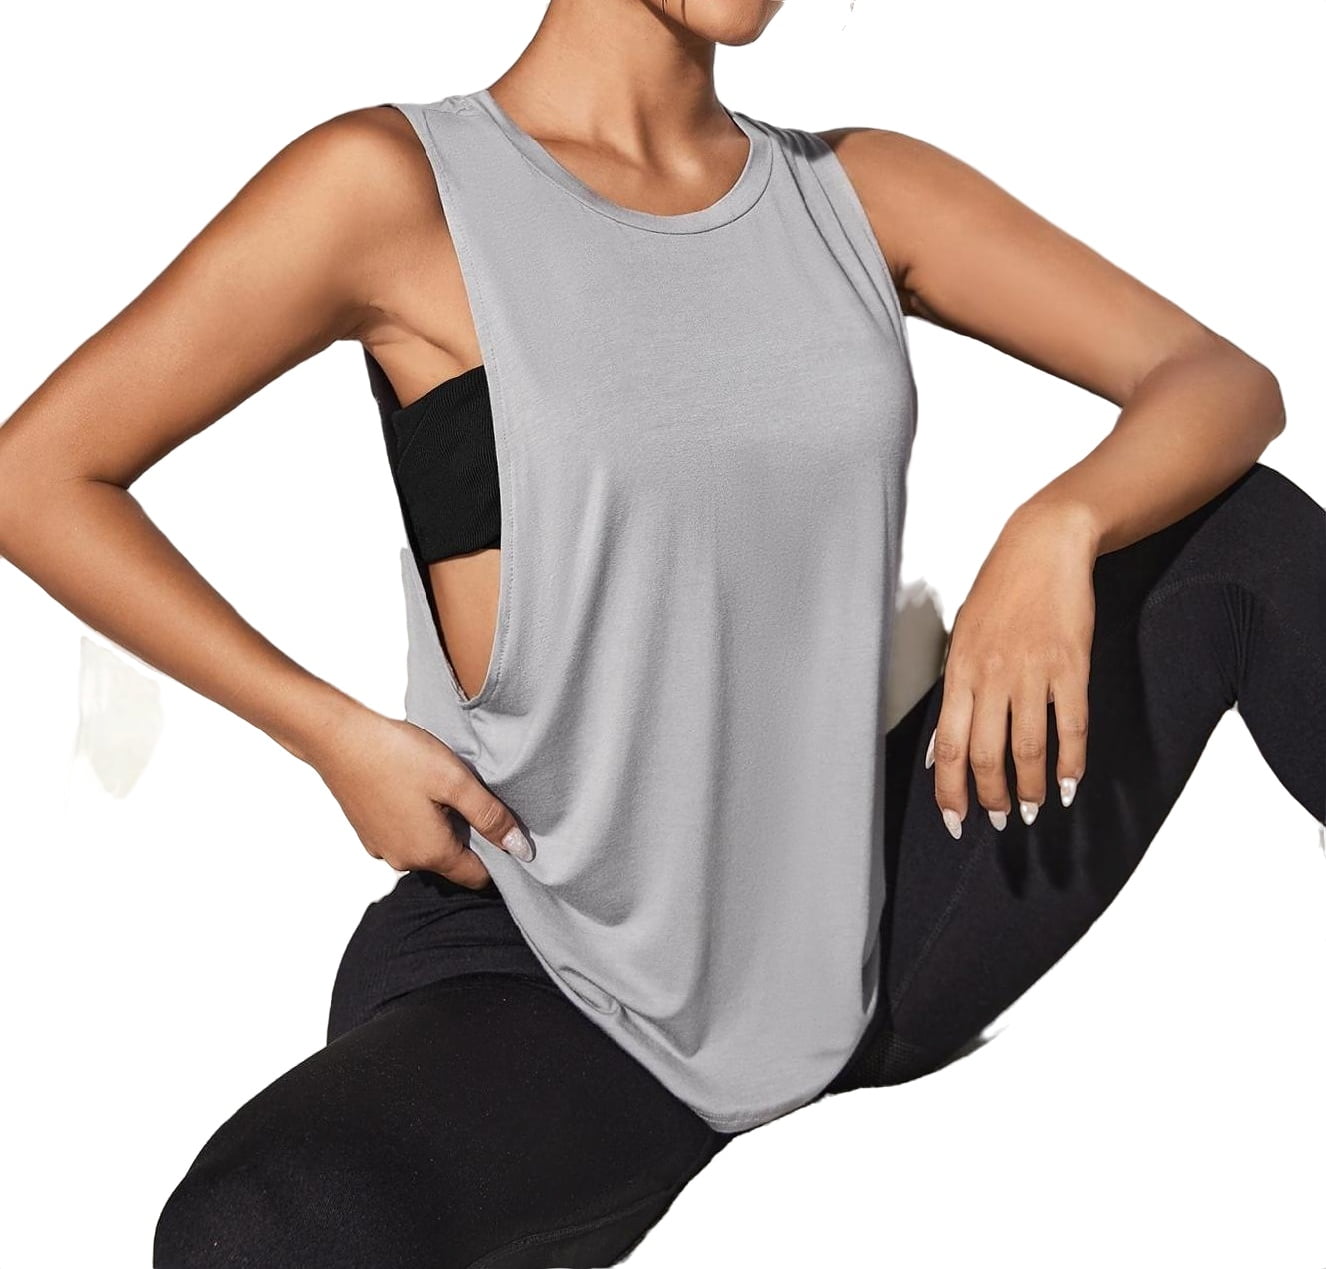 Fihapyli ICTIVE Workout Tank Tops for Women Yoga Tops for Women